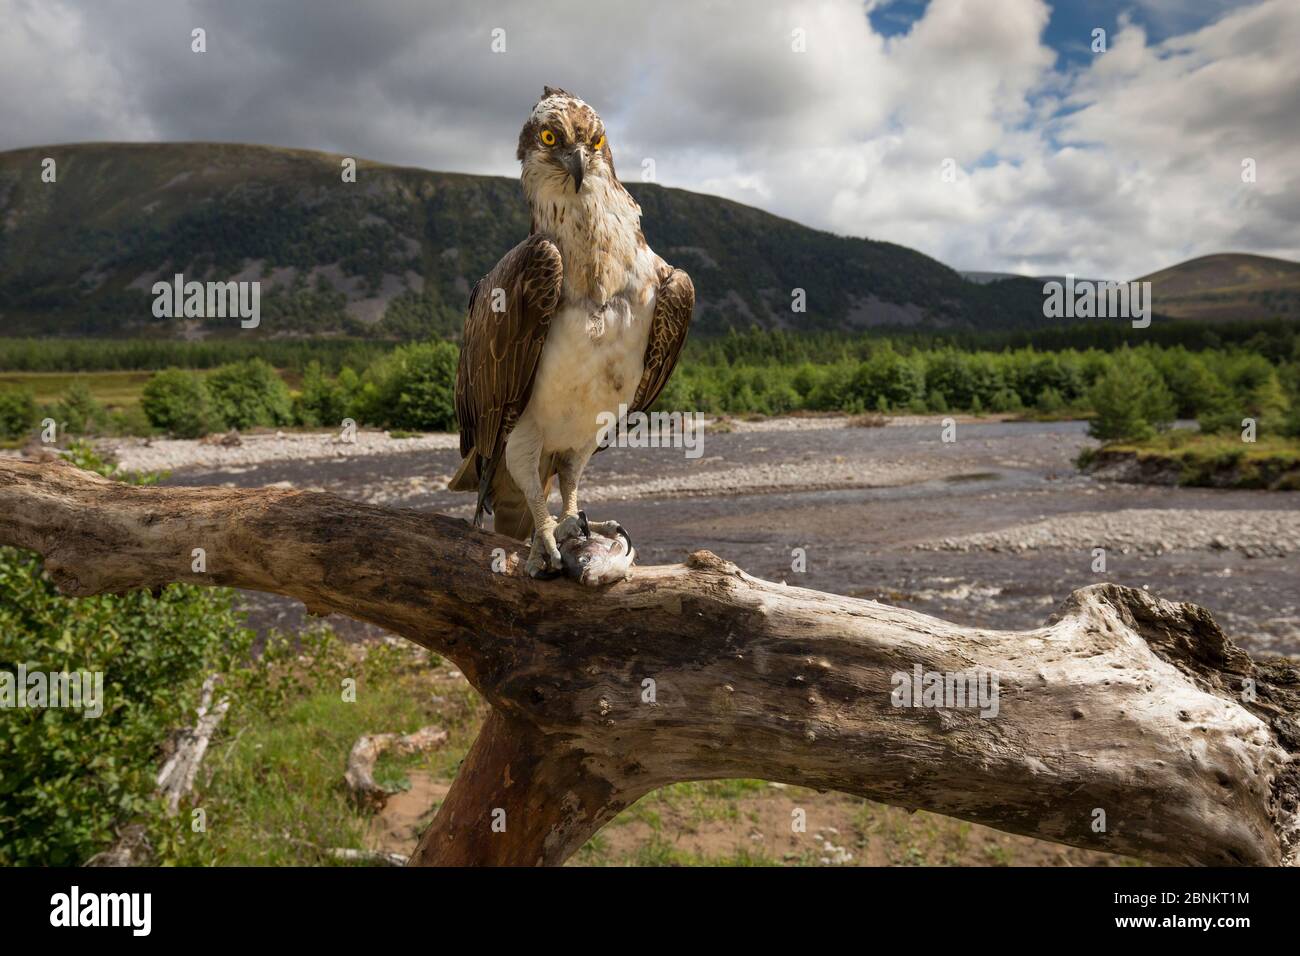 Osprey (Pandion haliaetus) perching on branch with fish, river and hills in background, Glenfeshie, Cairngorms National Park, Scotland, UK, August 201 Stock Photo